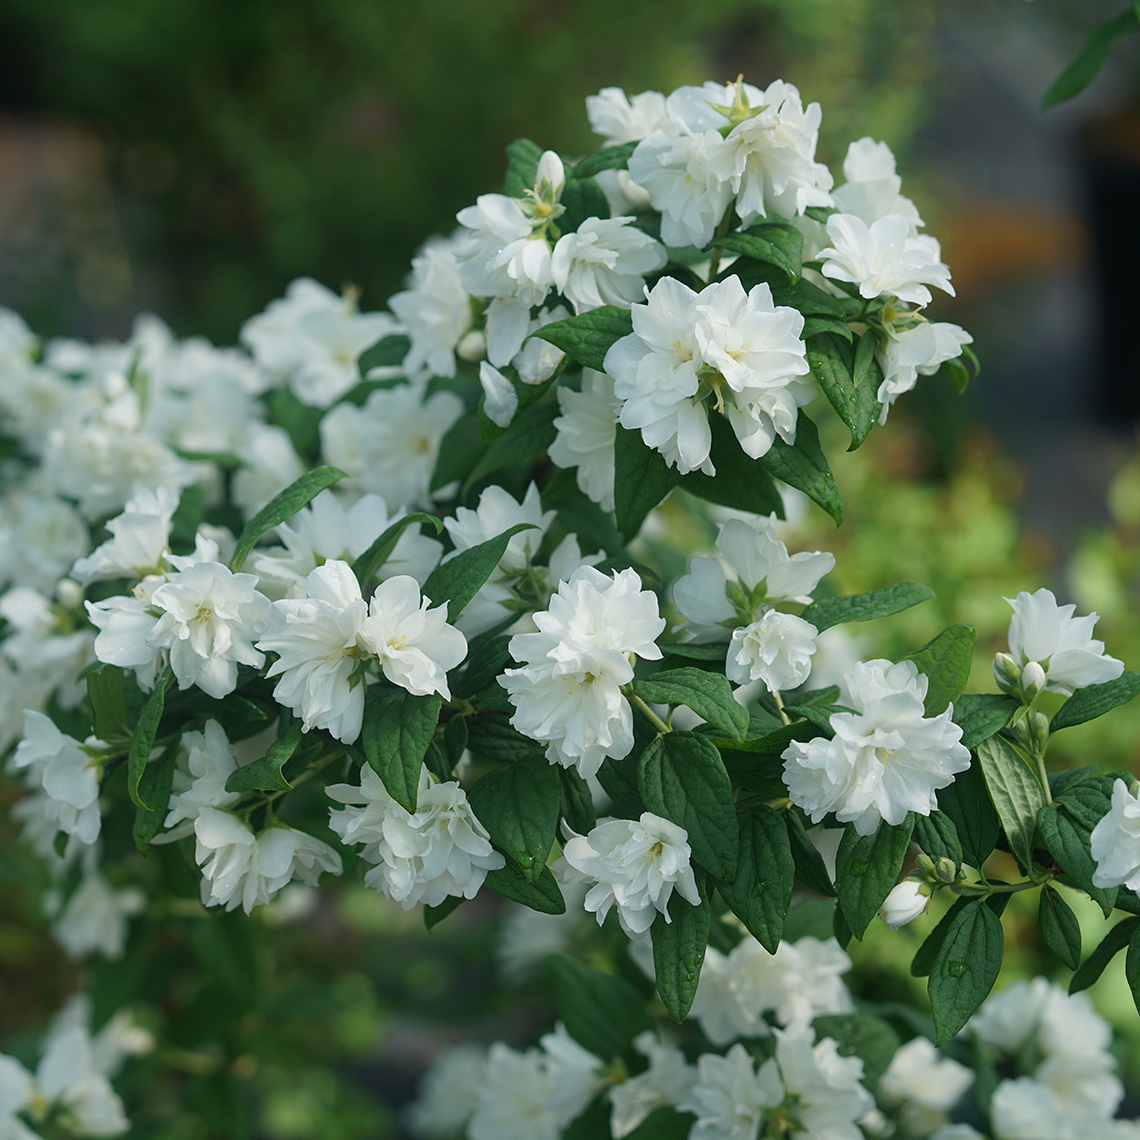 An arching branch of Illuminati Arch mock orange covered with white flowers